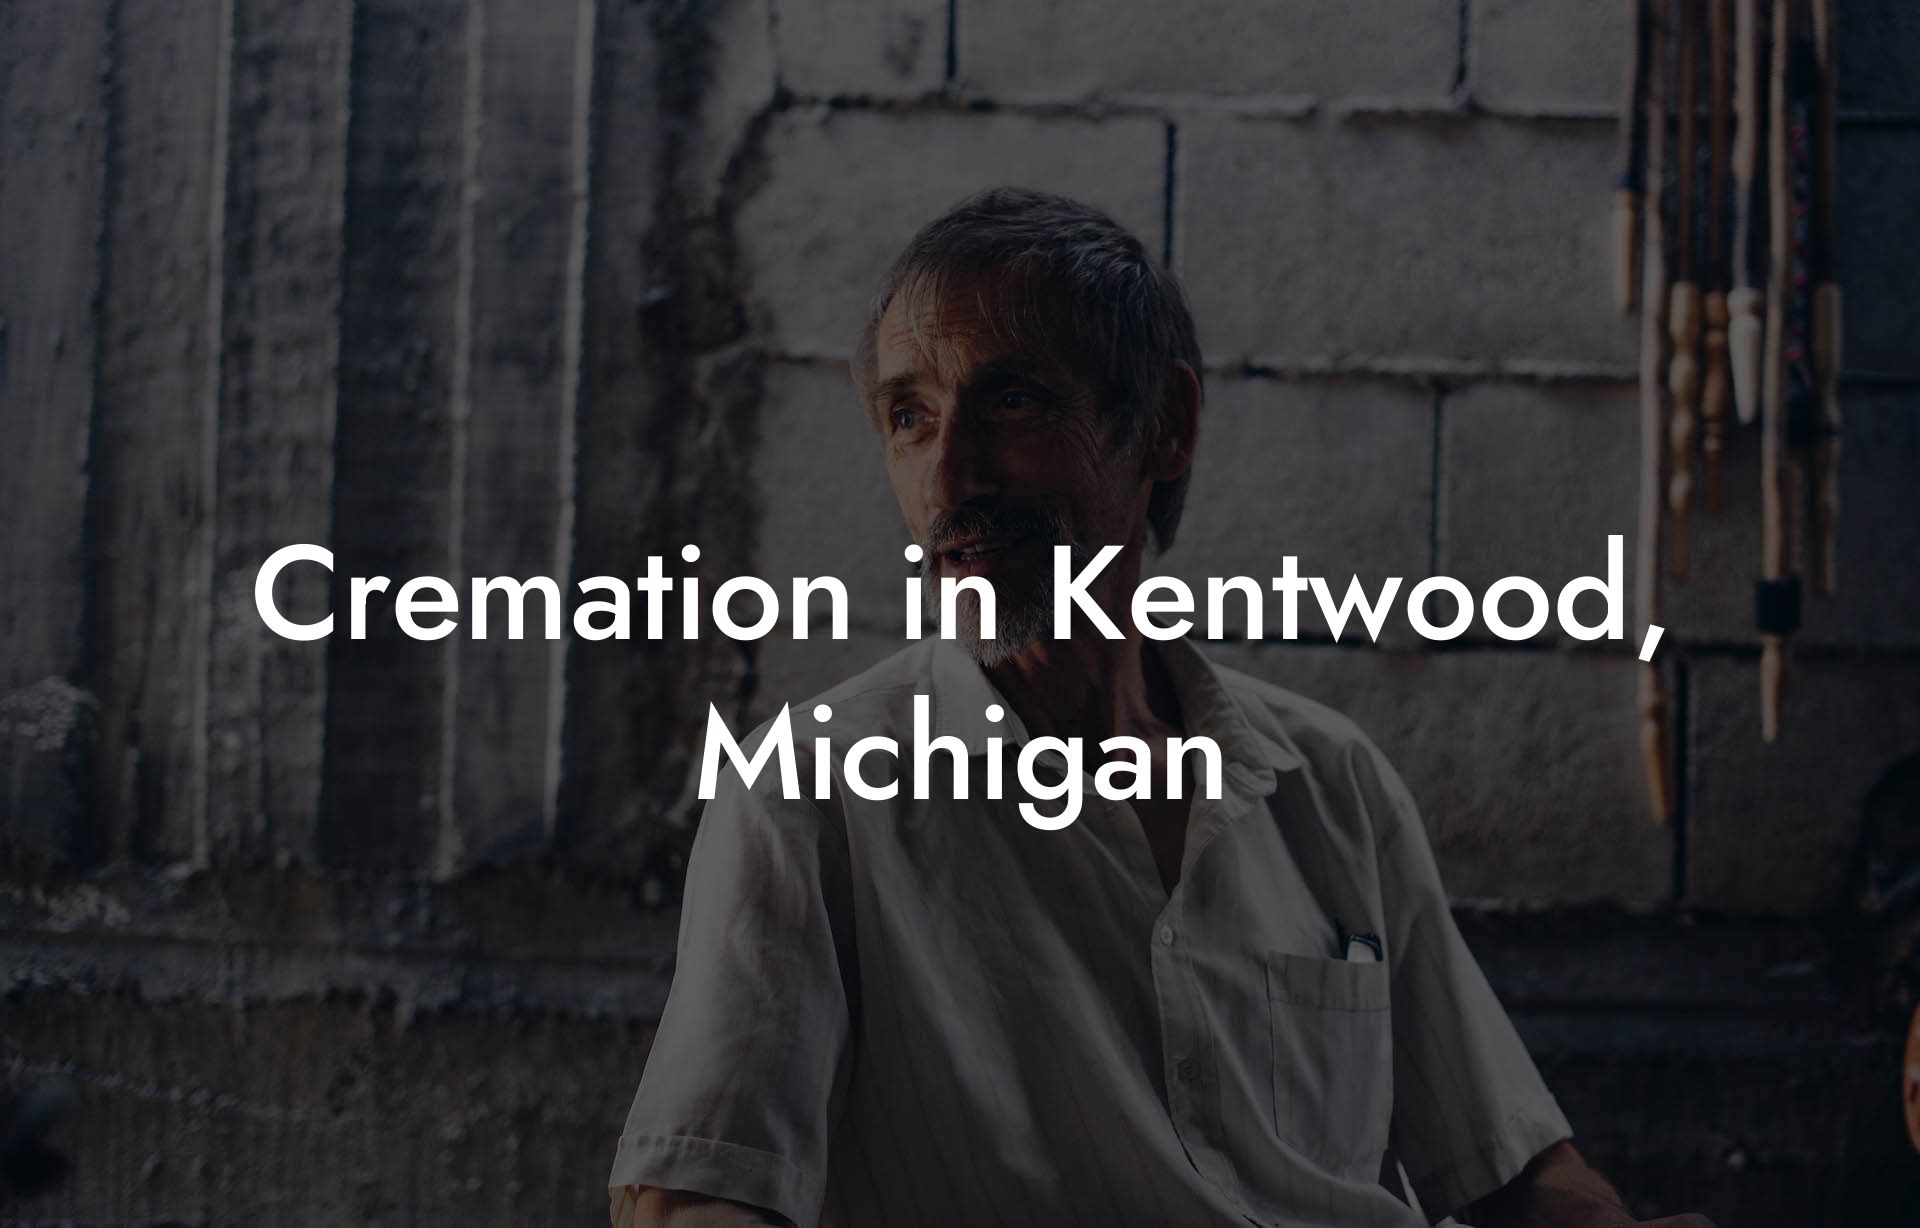 Cremation in Kentwood, Michigan